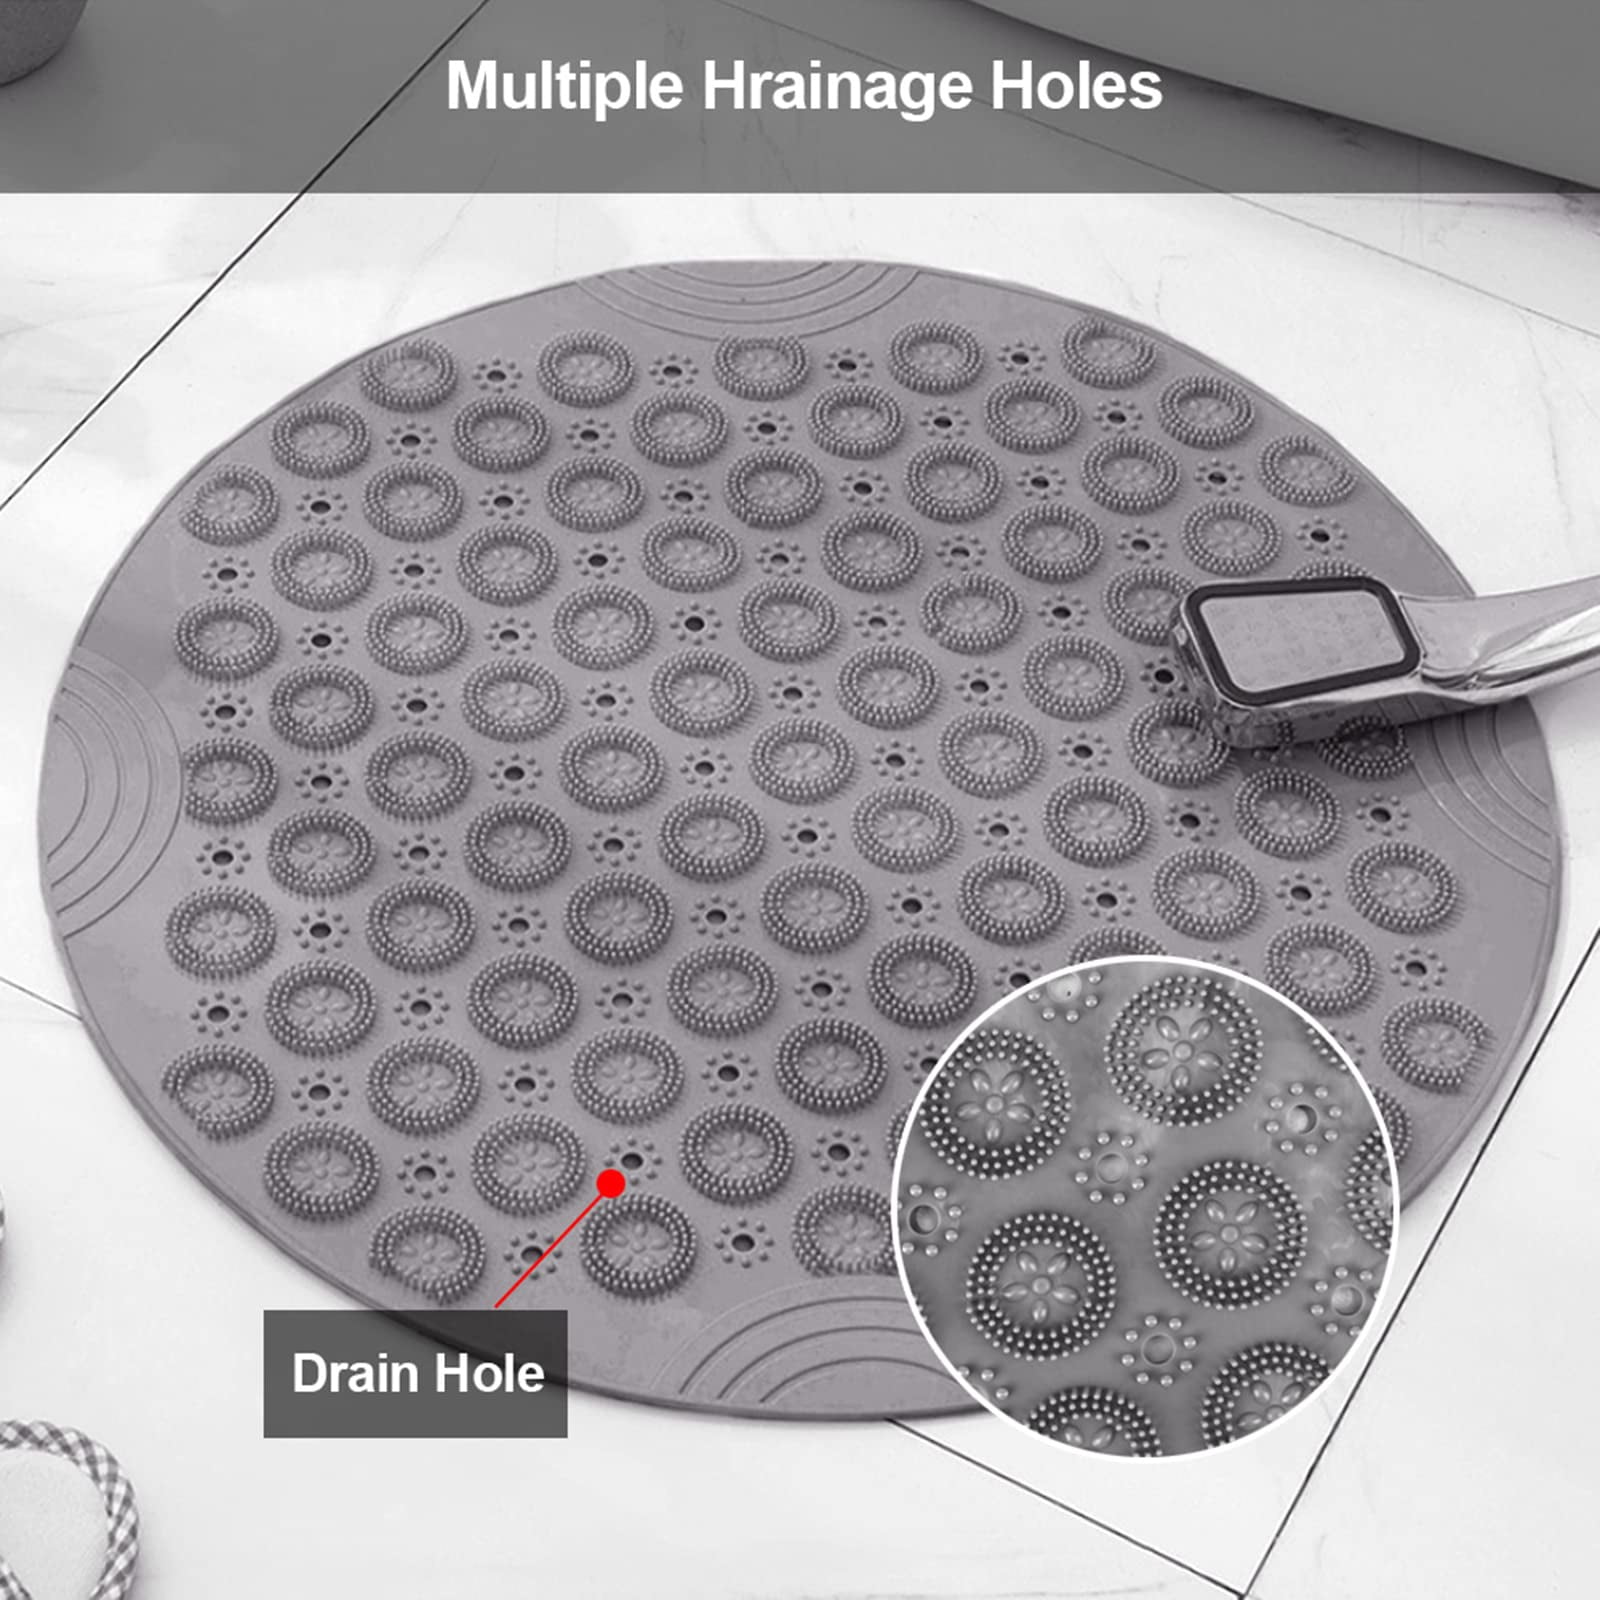 Meeyou Textured Surface Round Non Slip Shower Mat Anti Slip Bath Mats with Drain Hole in Middle for Shower Stall,Bathroom Floor,Showers 22 x 22